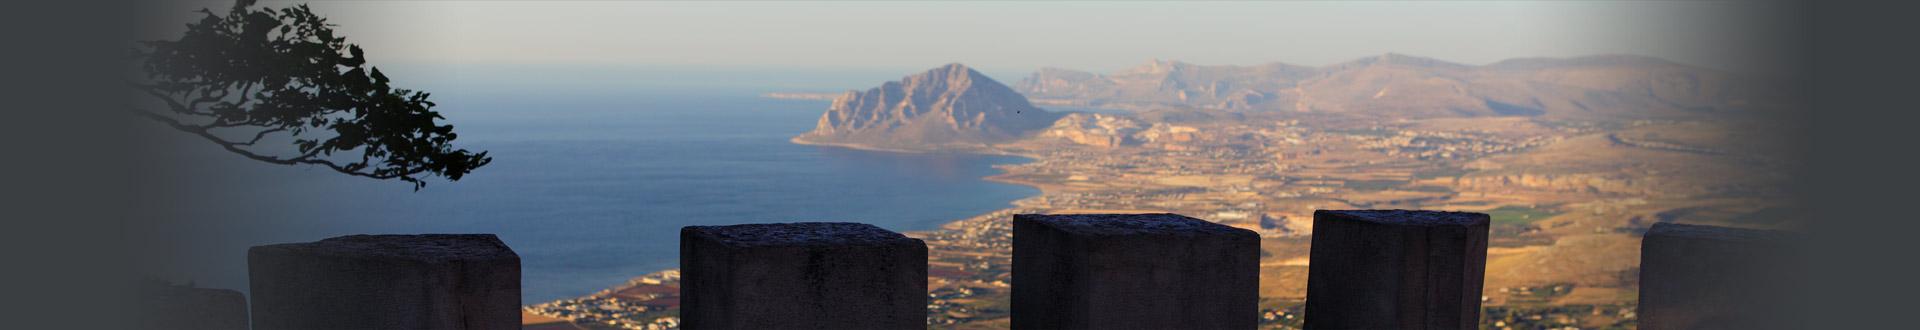 Villas in Sicily and Holiday homes near Erice